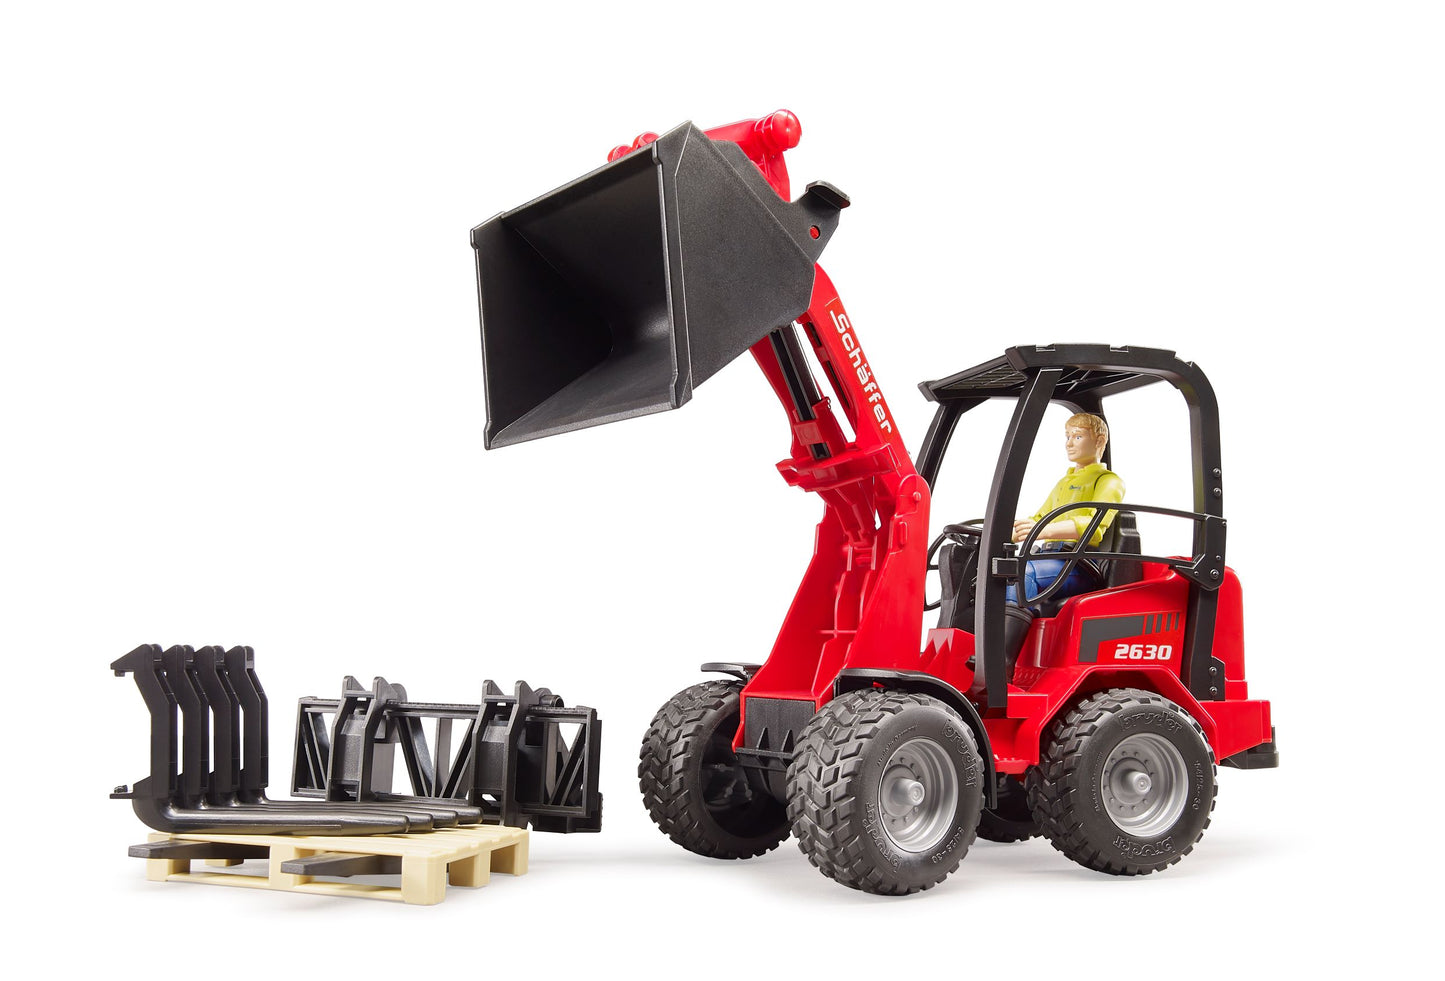 Compact Loader with Figure